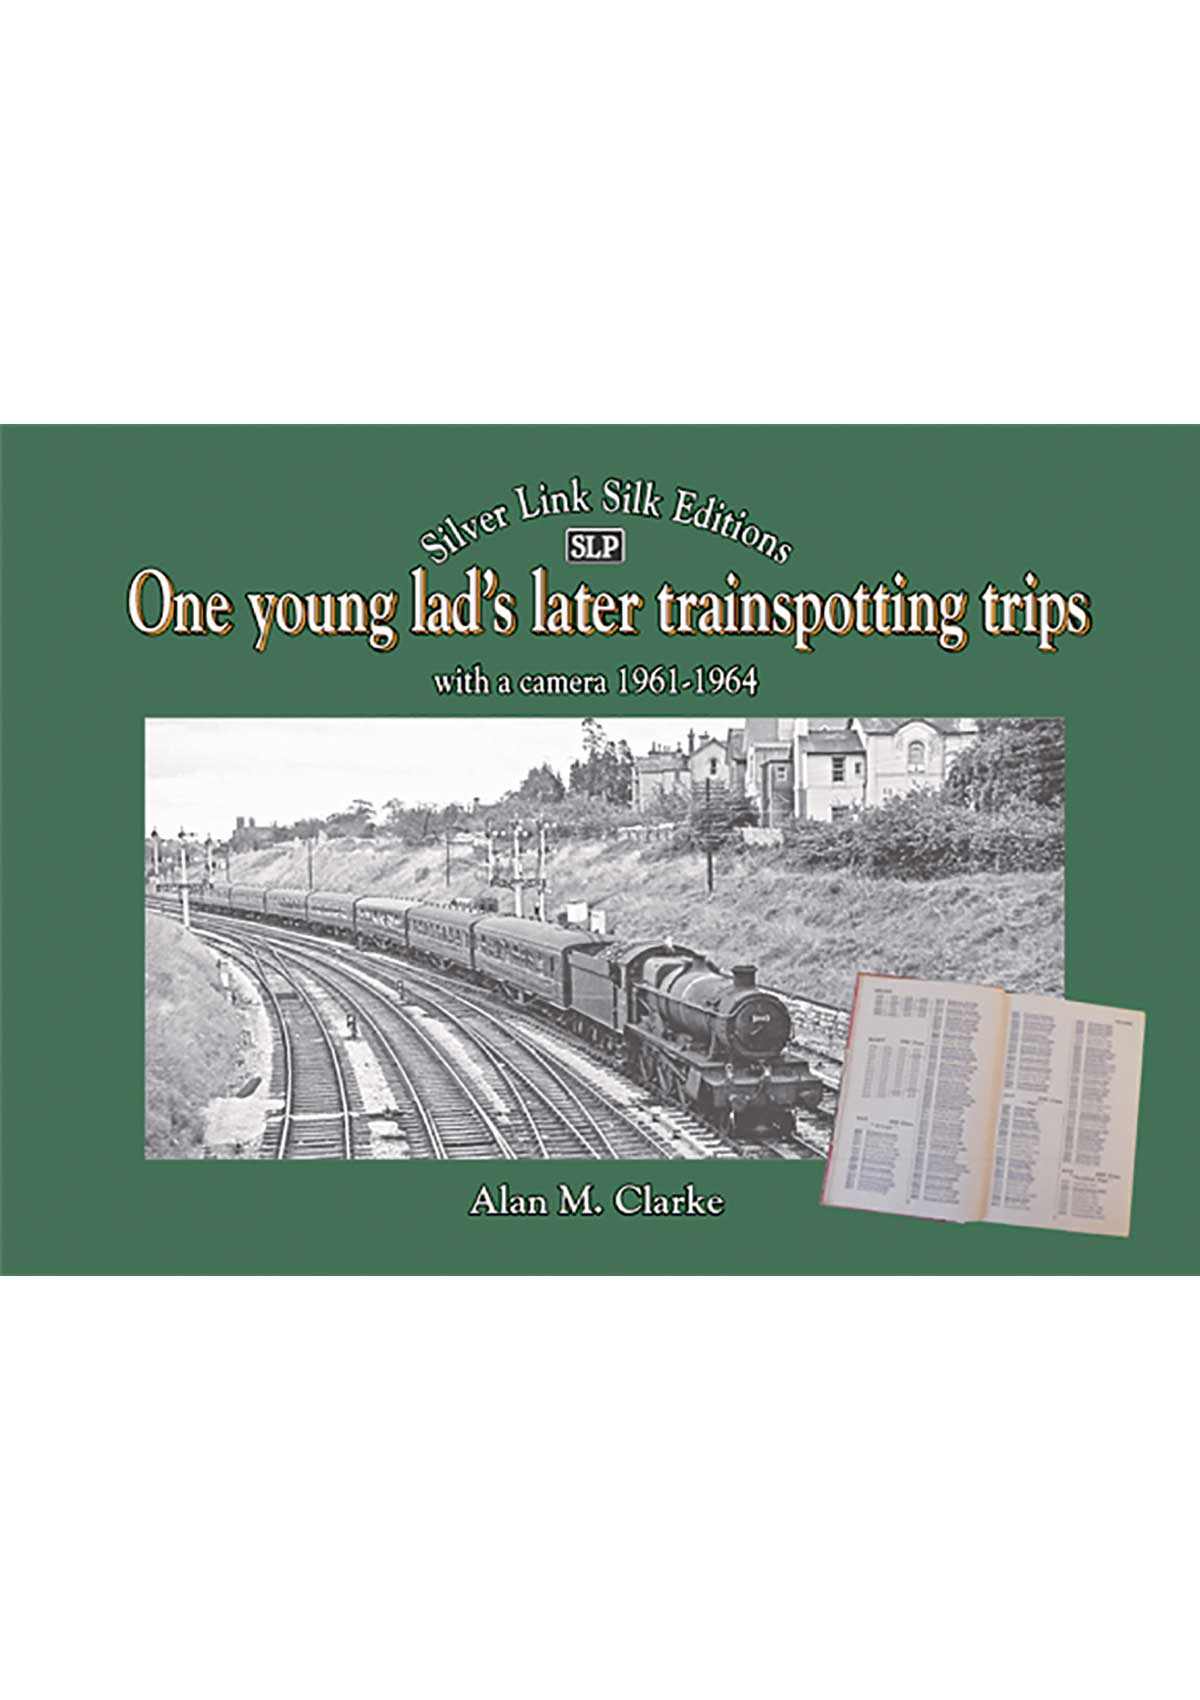 ONE YOUNG LAD'S LATER TRAINSPOTTING TRIPS WITH A CAMERA 1961-1964 LAST FEW COPIES